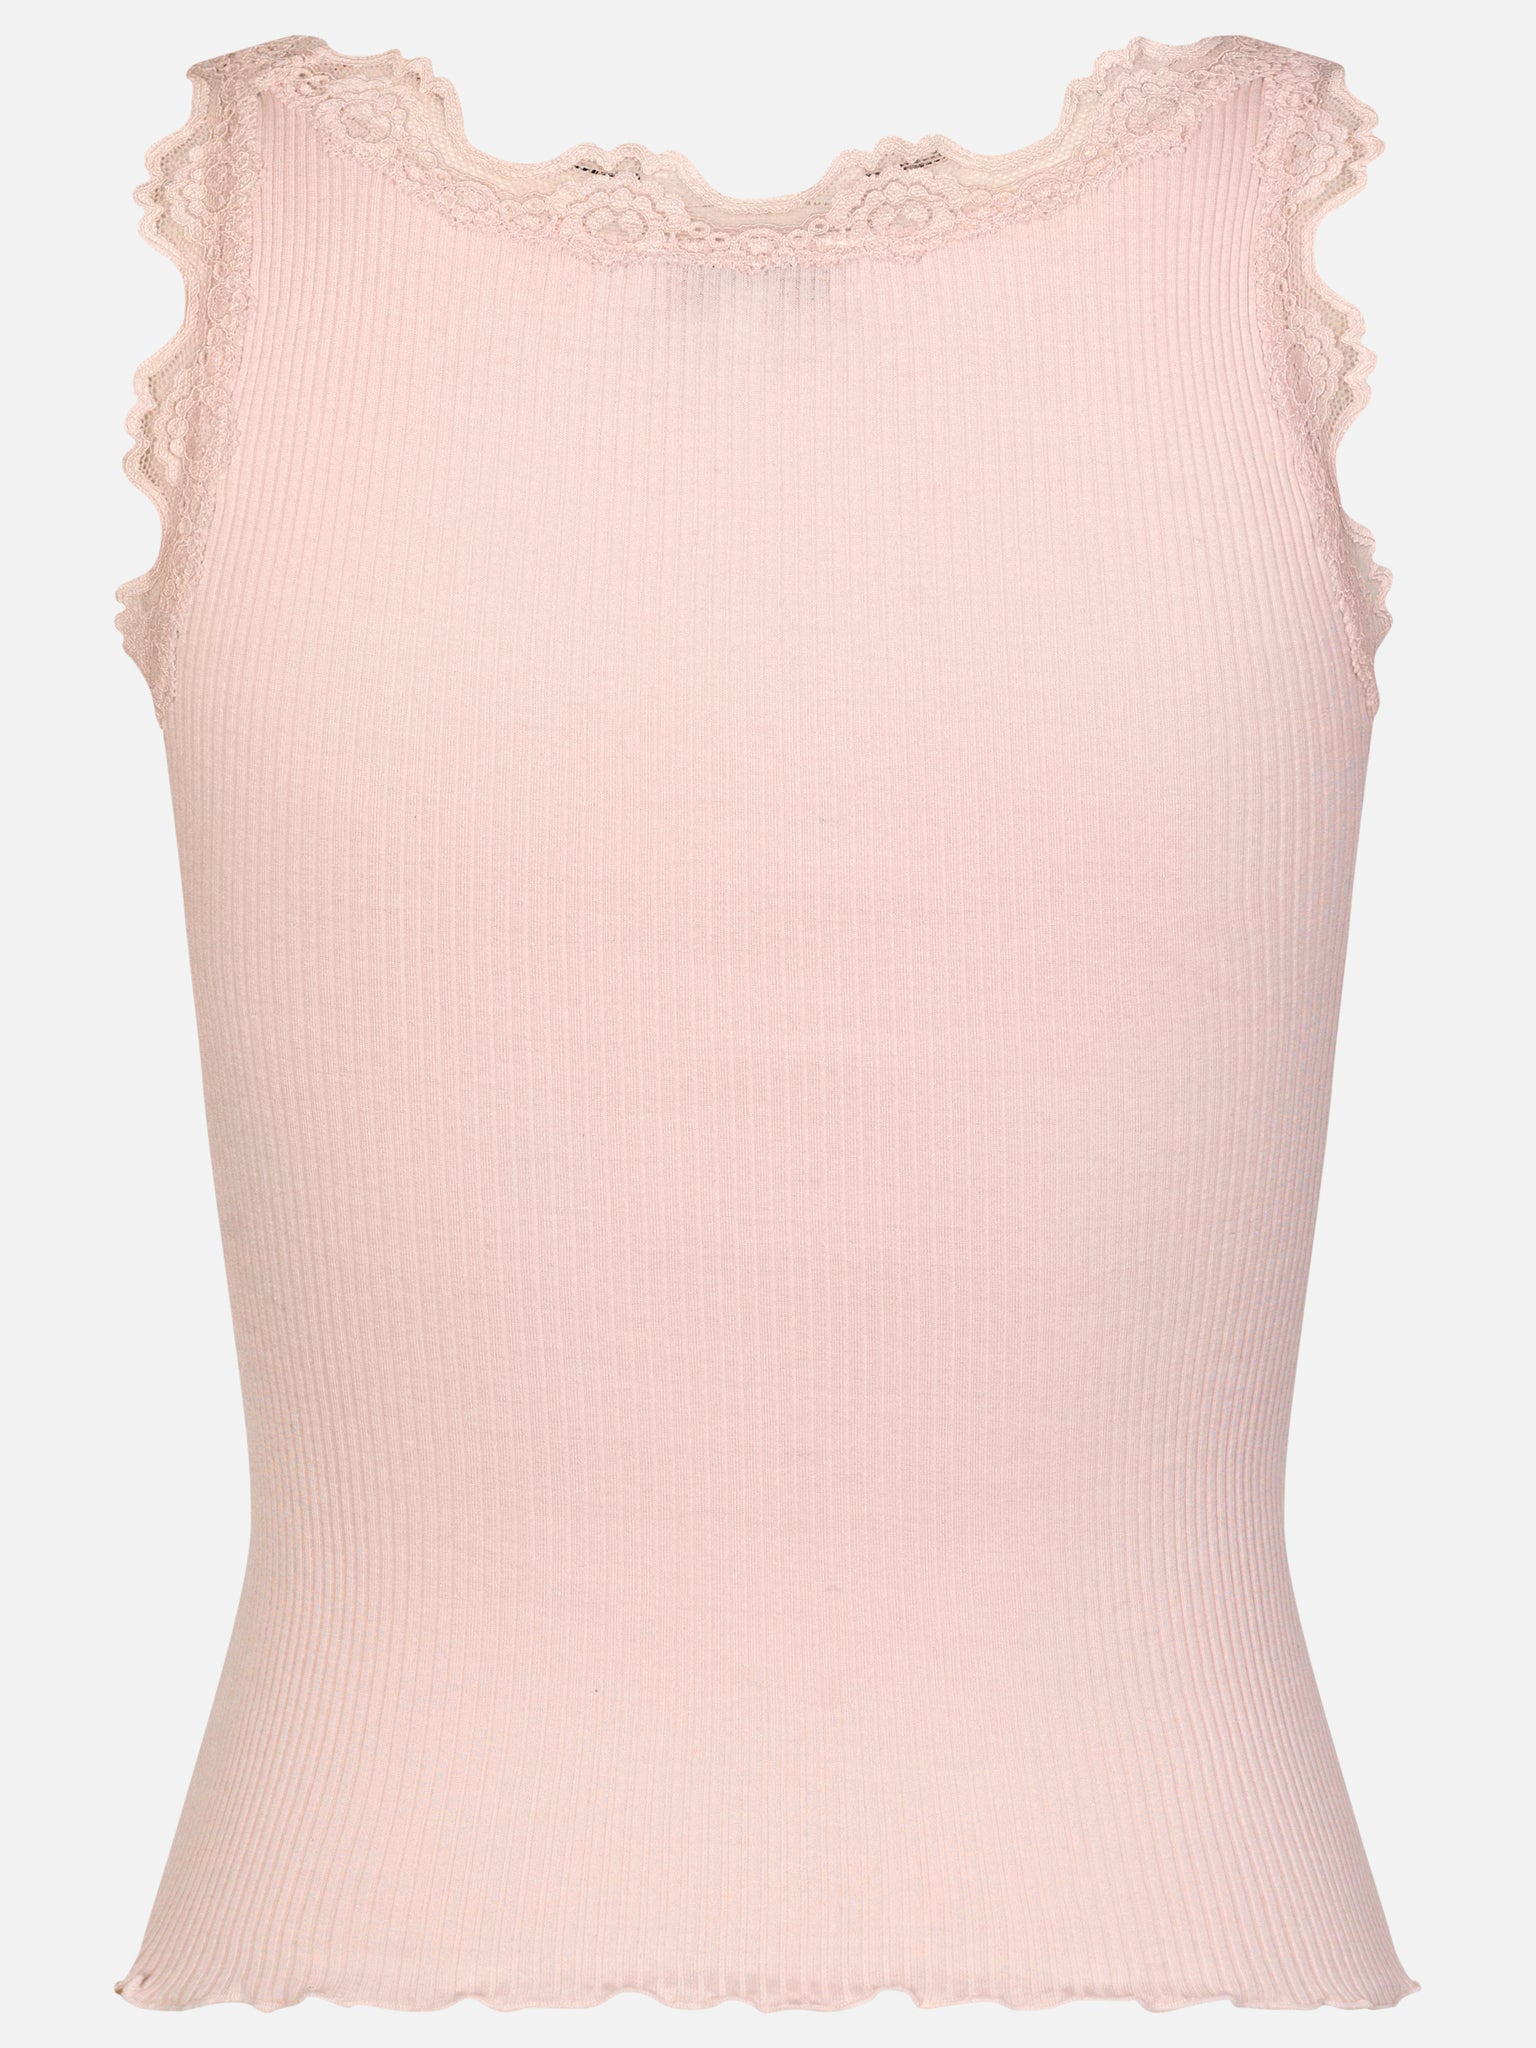 Cropped iconic silk top